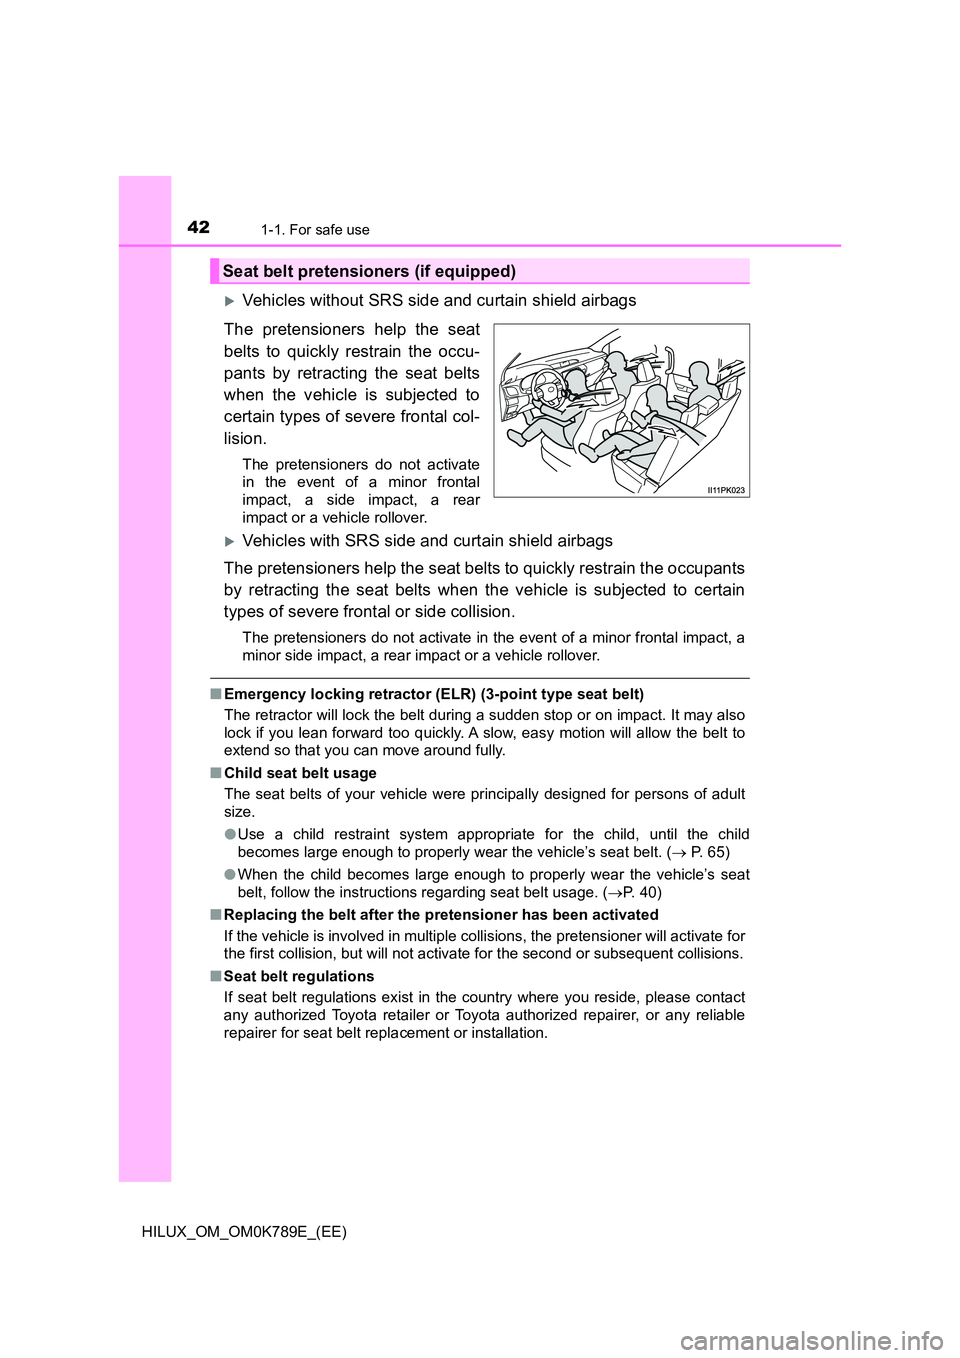 TOYOTA HILUX 2023  Owners Manual 421-1. For safe use
HILUX_OM_OM0K789E_(EE)
Vehicles without SRS side and curtain shield airbags 
The pretensioners help the seat 
belts to quickly restrain the occu- 
pants by retracting the seat b